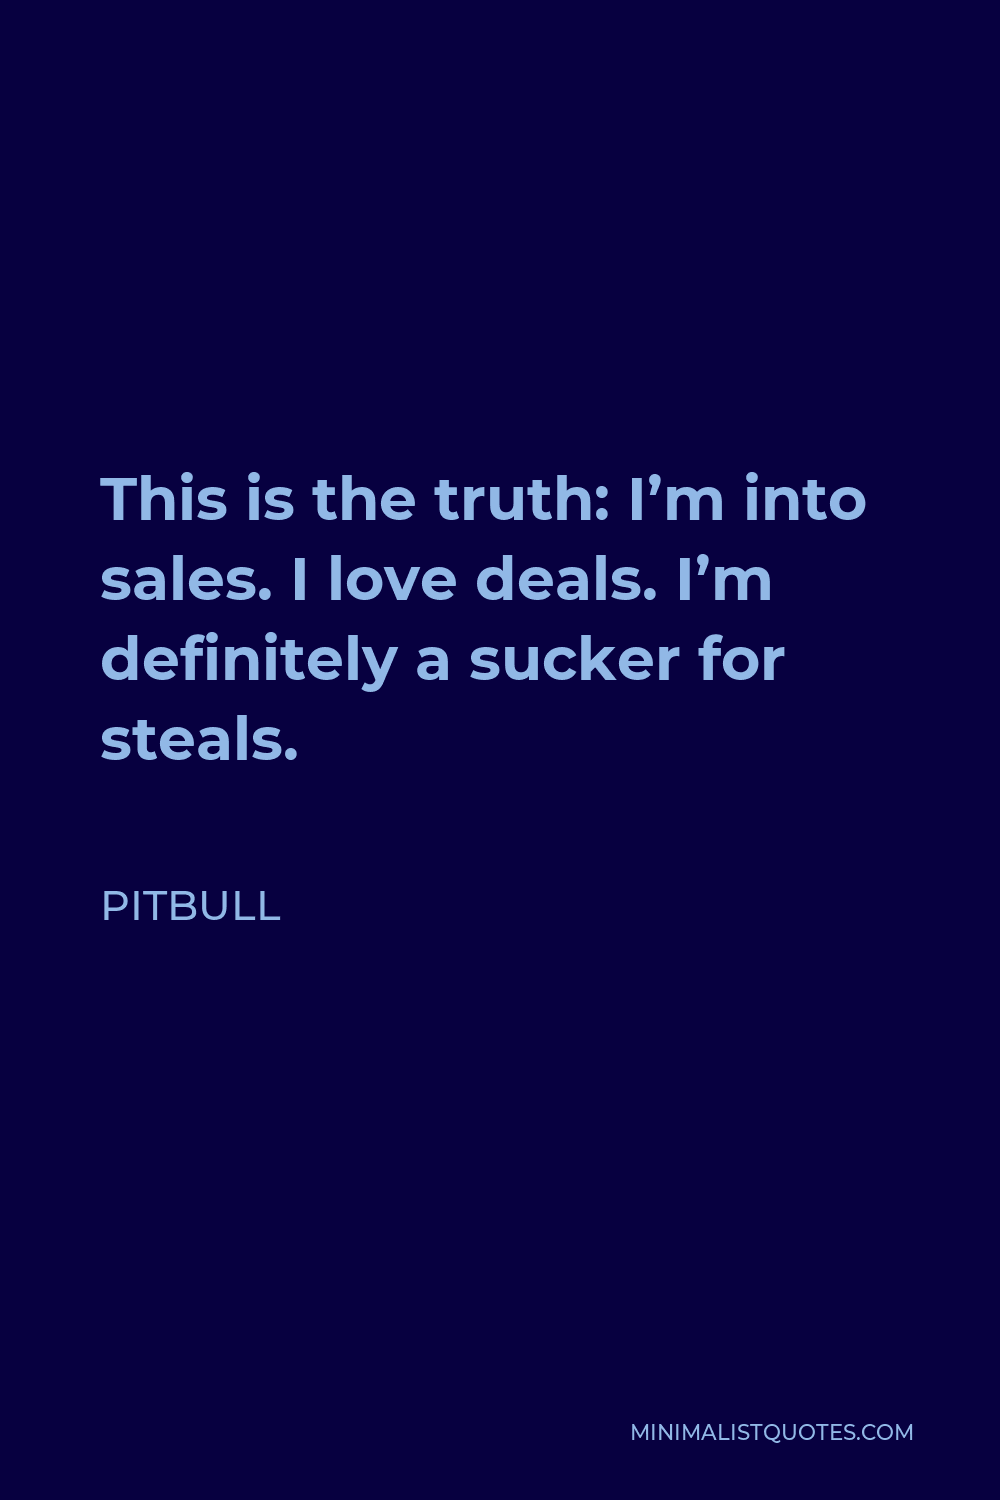 Pitbull Quote - This is the truth: I’m into sales. I love deals. I’m definitely a sucker for steals.